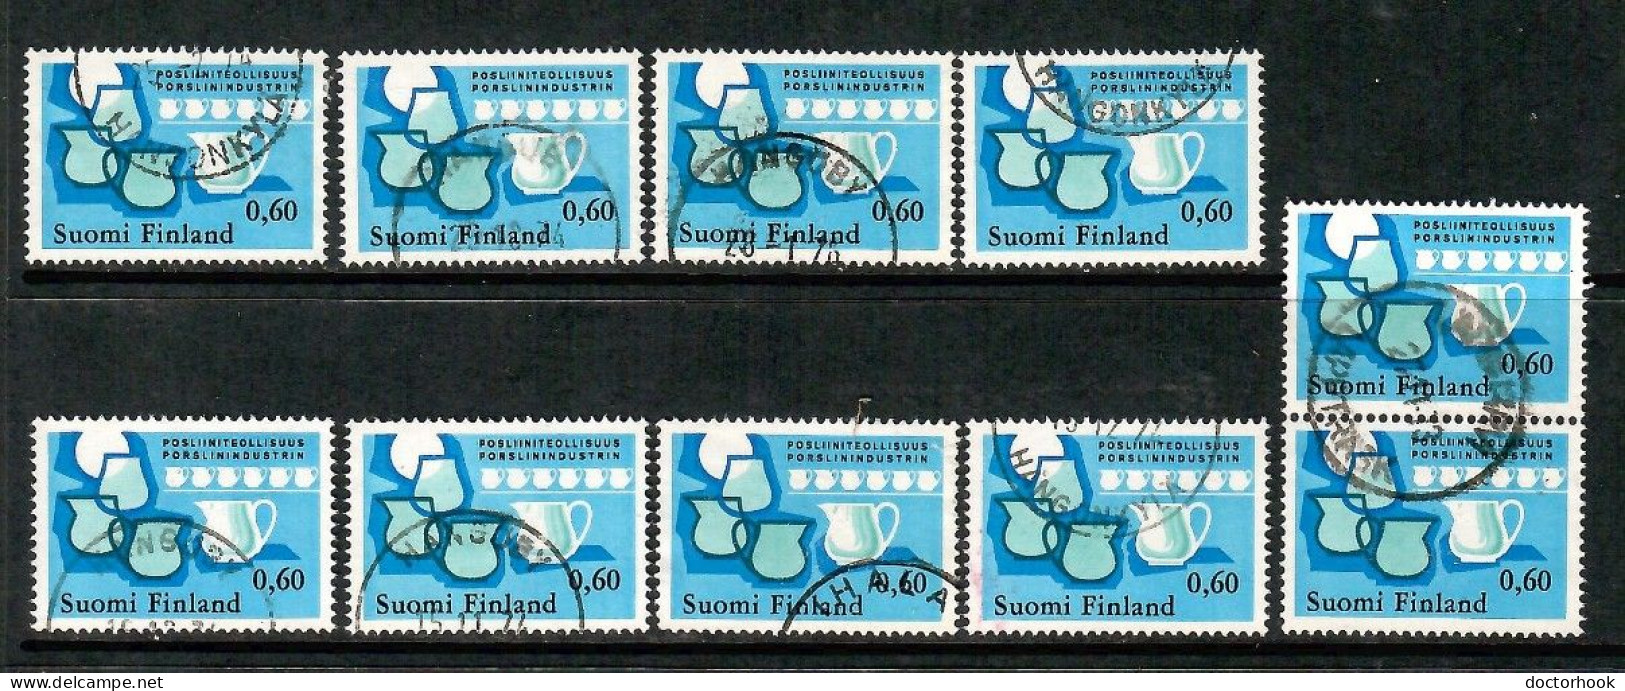 FINLAND   Scott # 541 USED WHOLESALE LOT OF 10 (CONDITION AS PER SCAN) (WH-631) - Verzamelingen